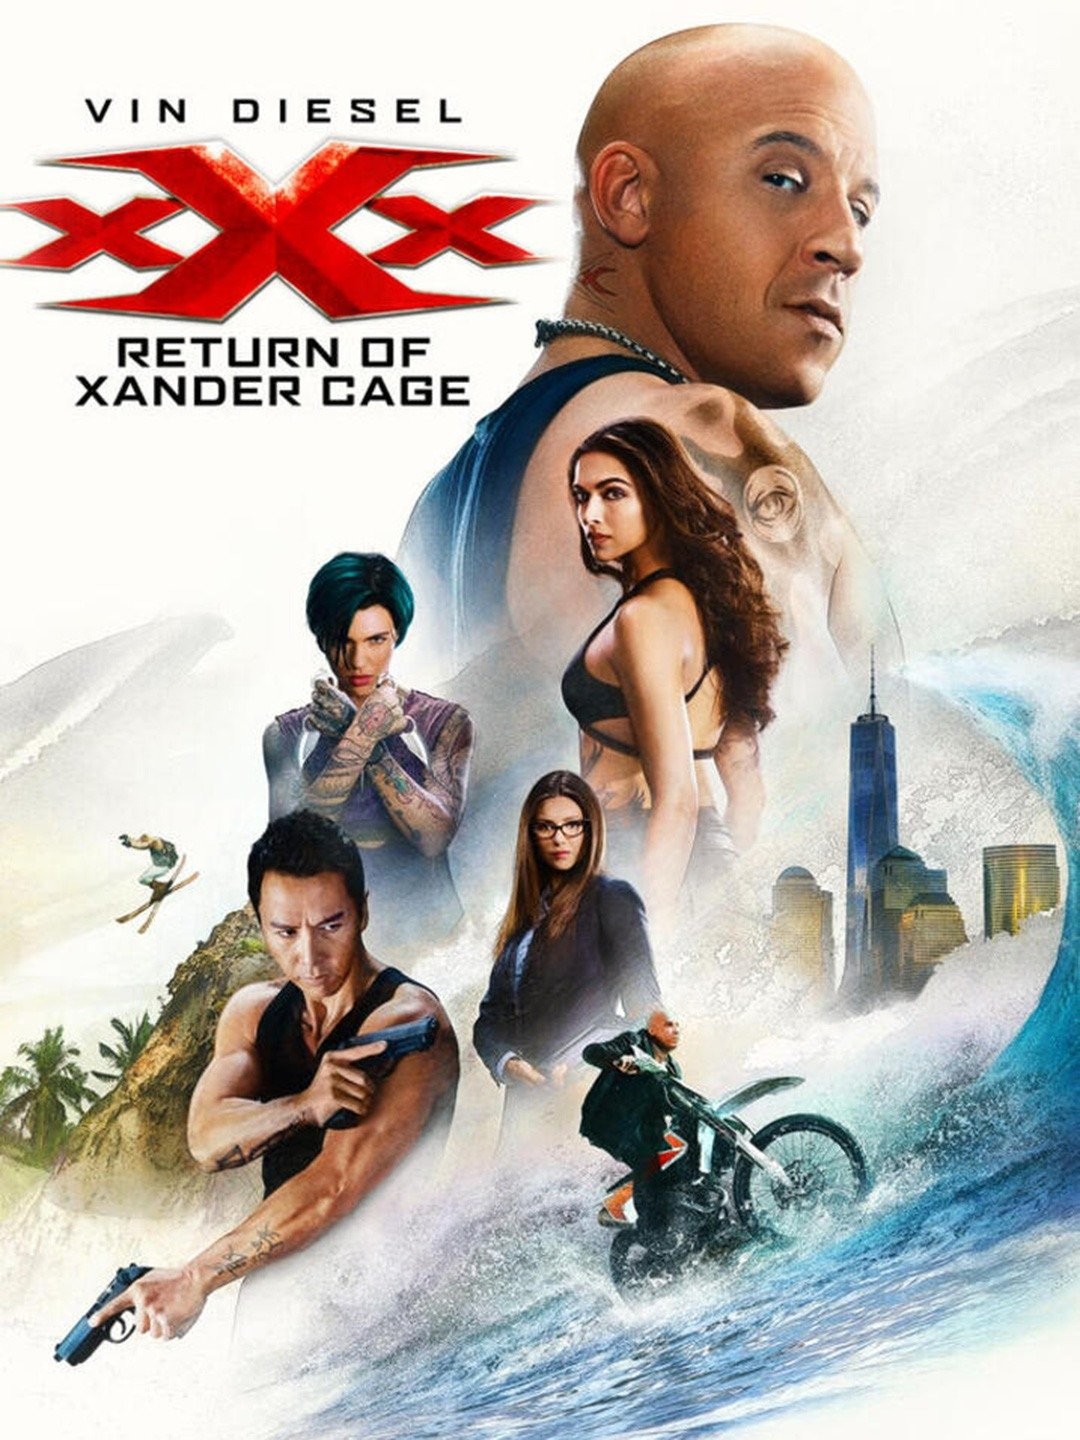 Xxx return of xander cage session times